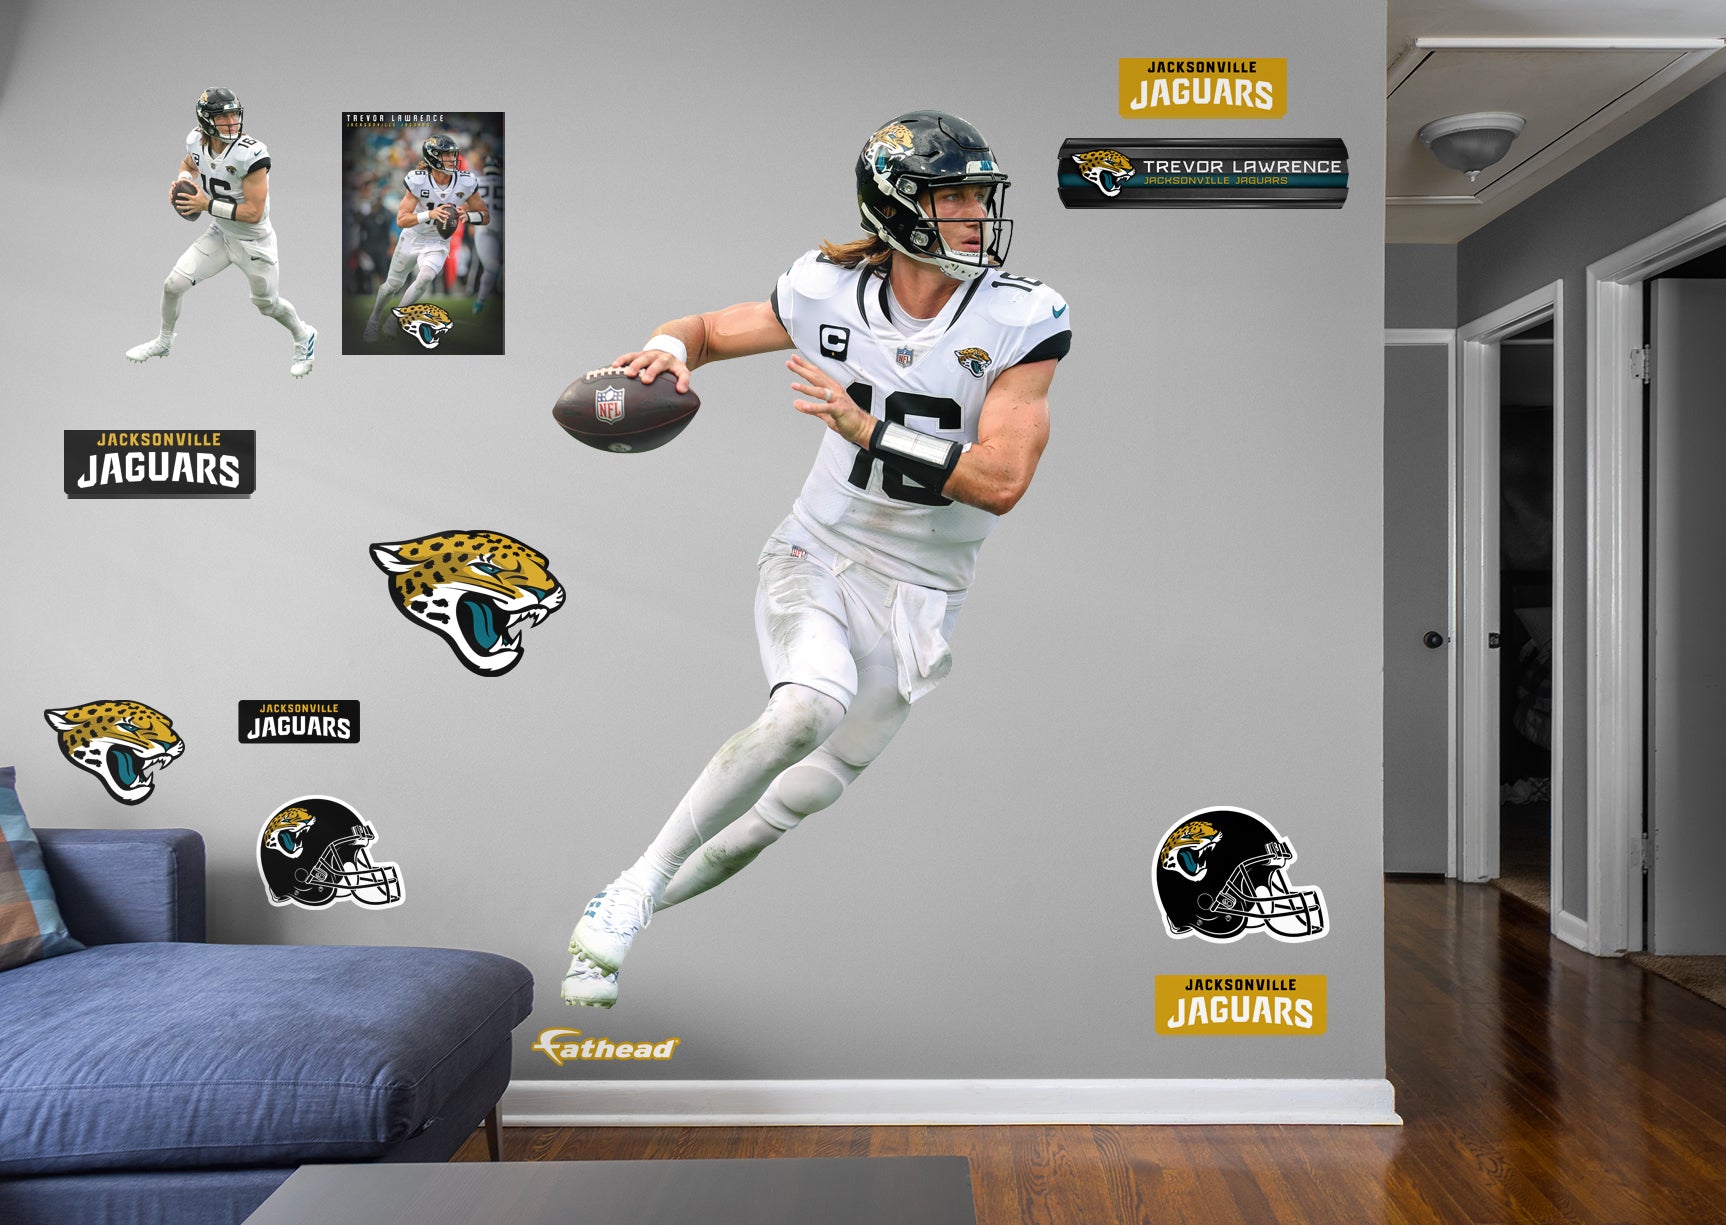 Jacksonville Jaguars: Trevor Lawrence 2021 White Jersey - NFL Removable Adhesive Wall Decal XL